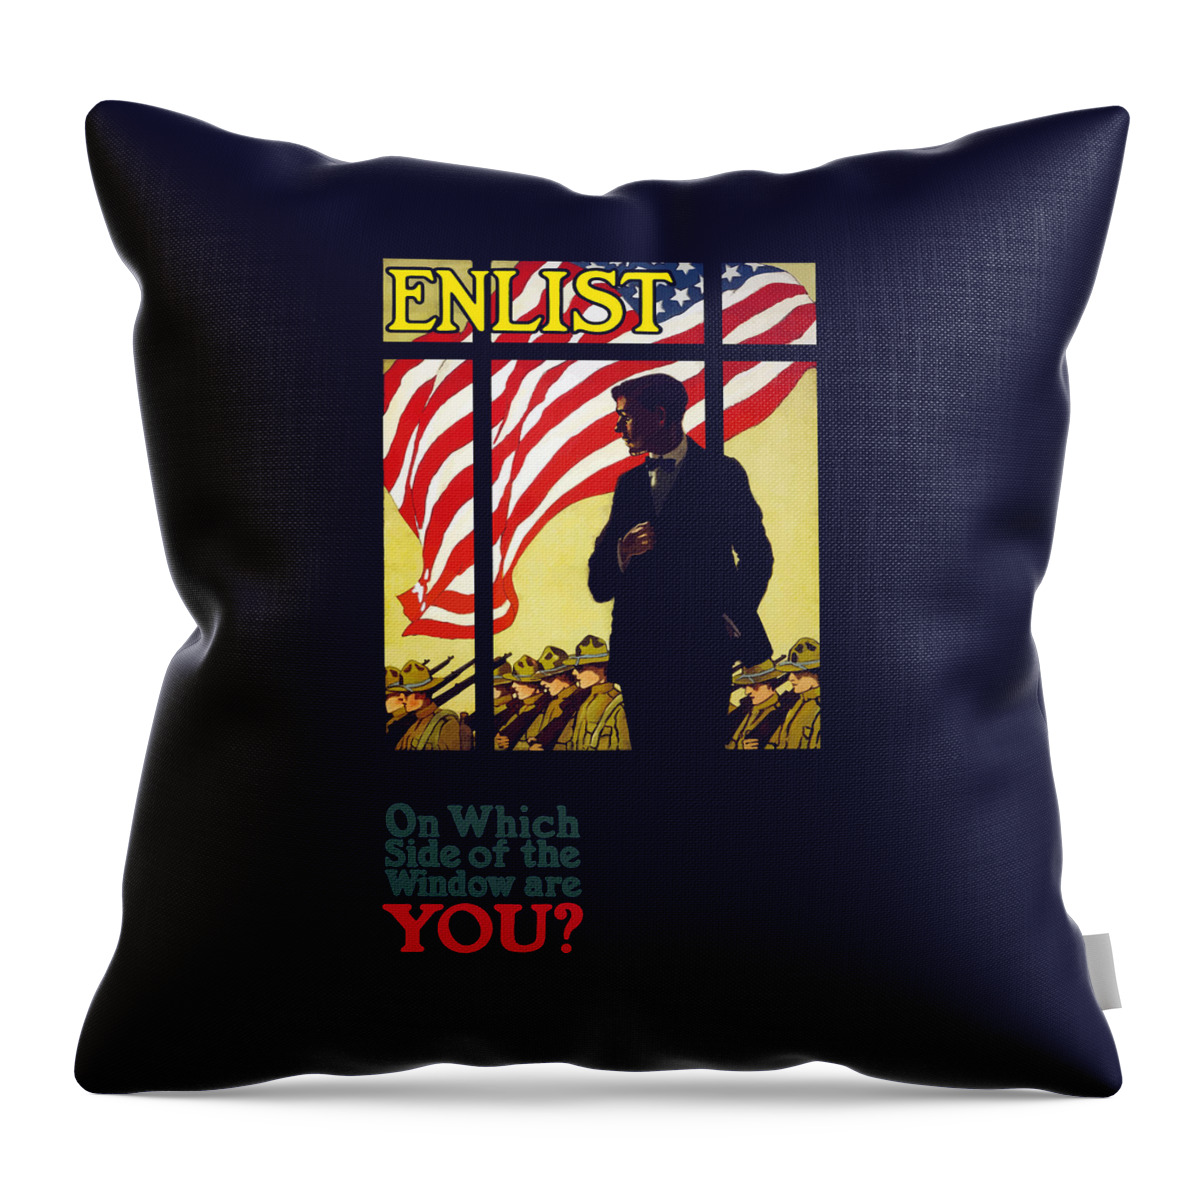 Ww1 Propaganda Throw Pillow featuring the painting On Which Side Of The Window Are You by War Is Hell Store